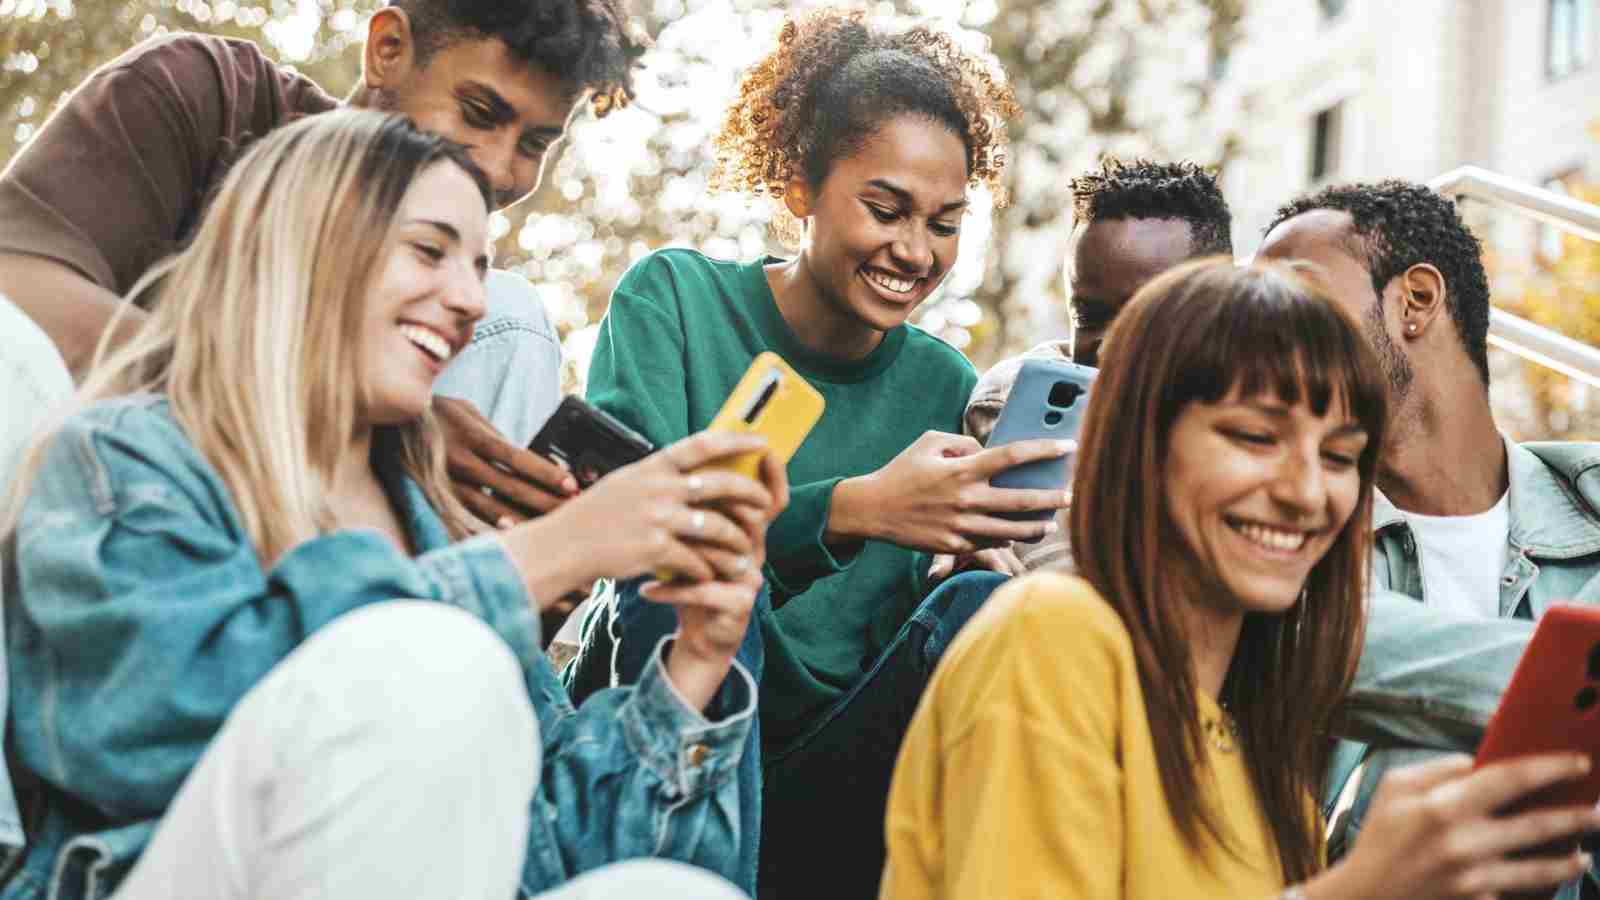 Friendship Day 2023 in India: How Social Media Can Strengthen or Weaken Our Friendships